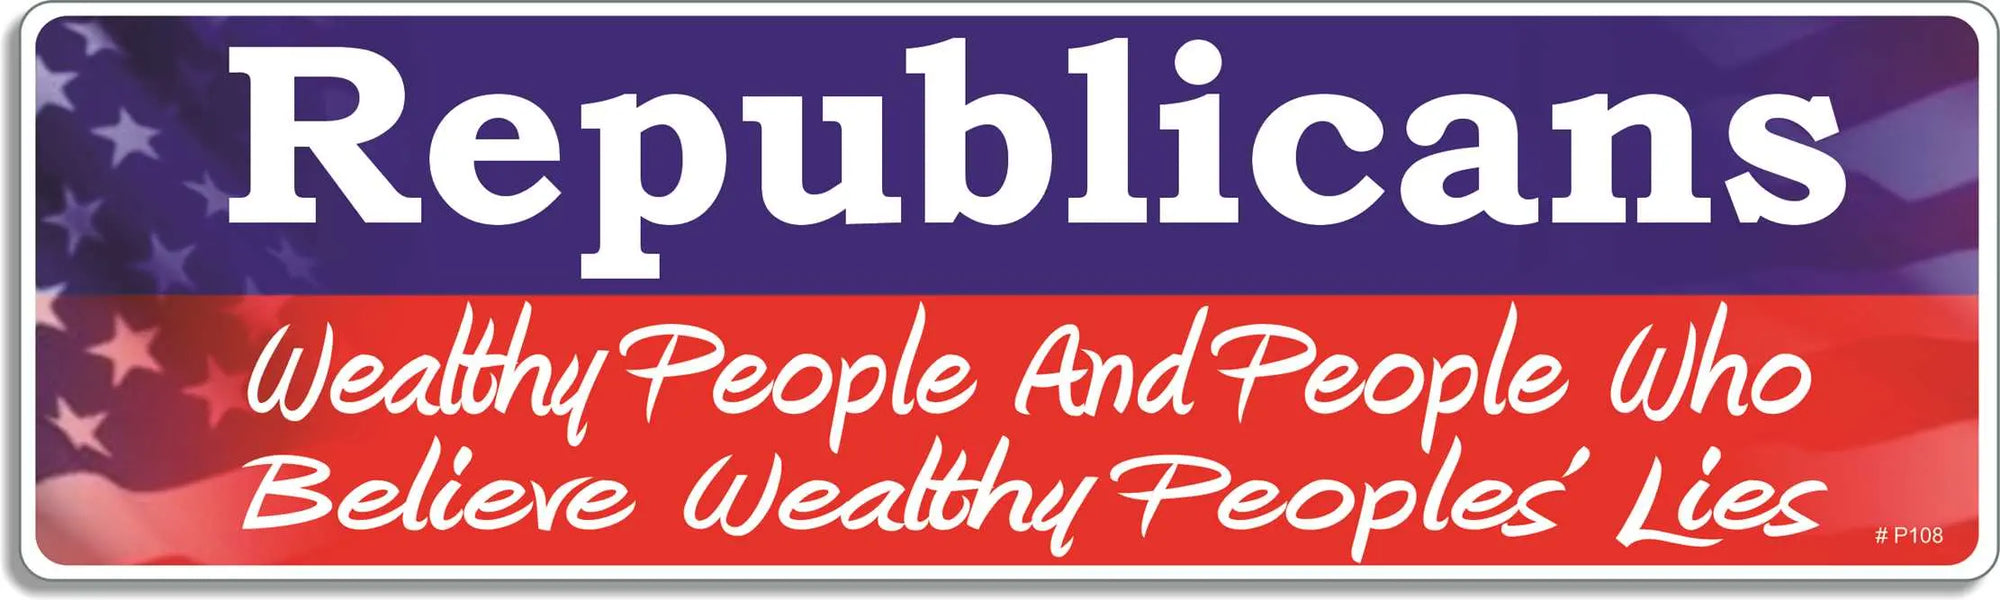 REPUBLICANS: Wealthy People And People Who Believe Wealthy Peoples' Lies - Liberal Bumper Sticker, Car Magnet Humper Bumper